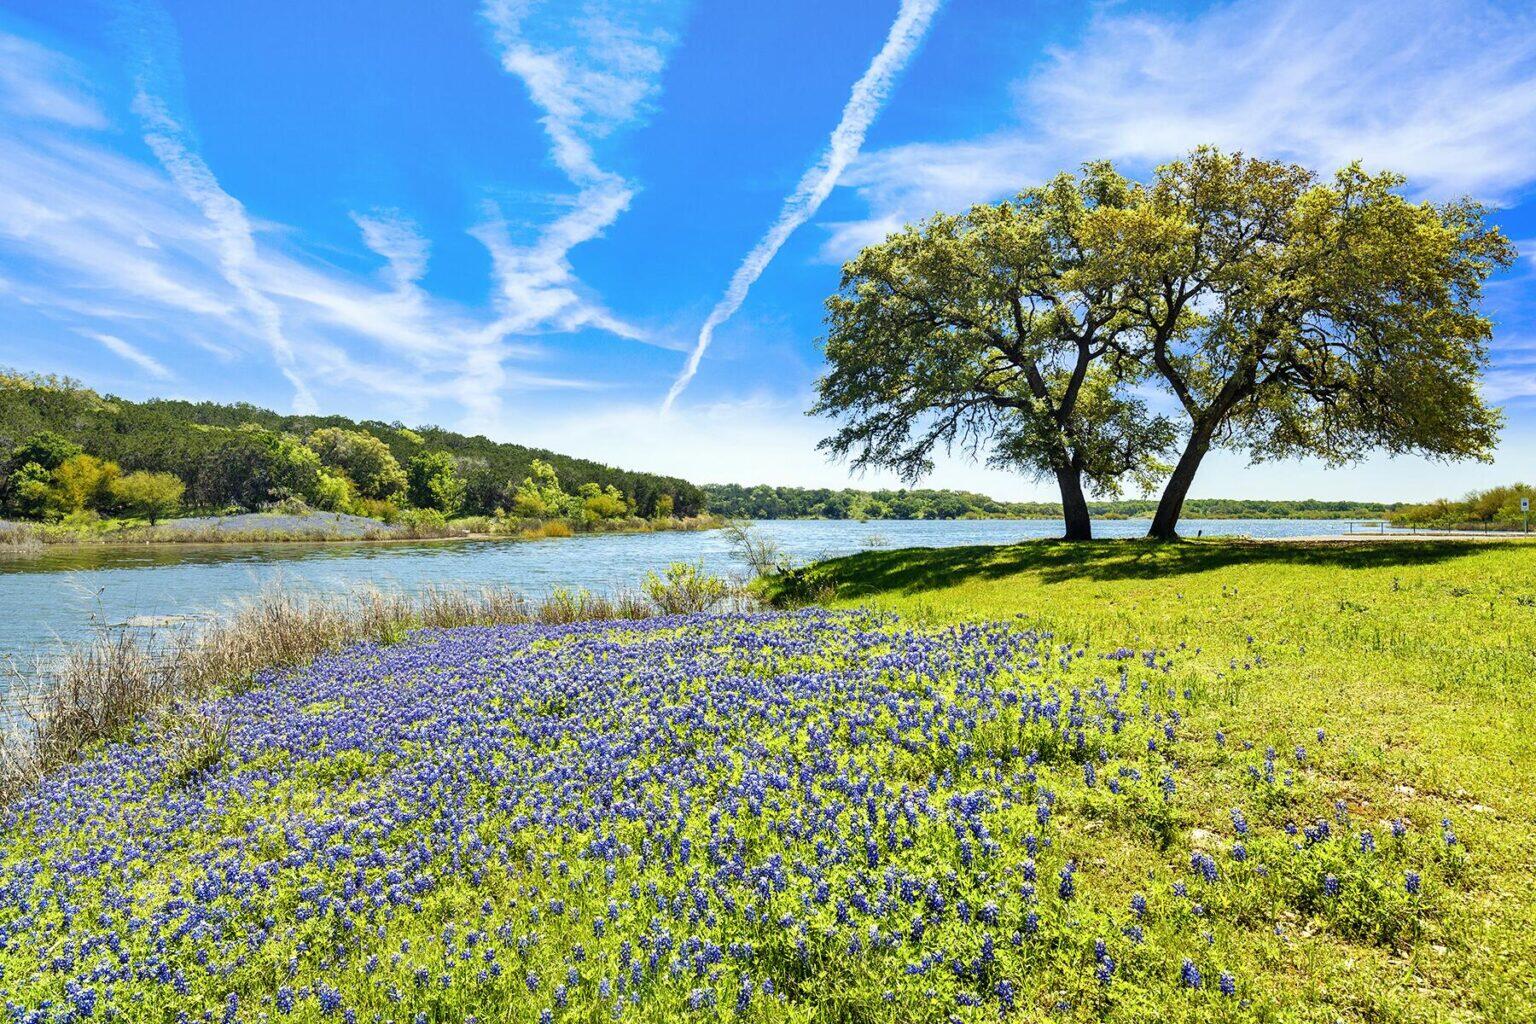 hill country travel guide